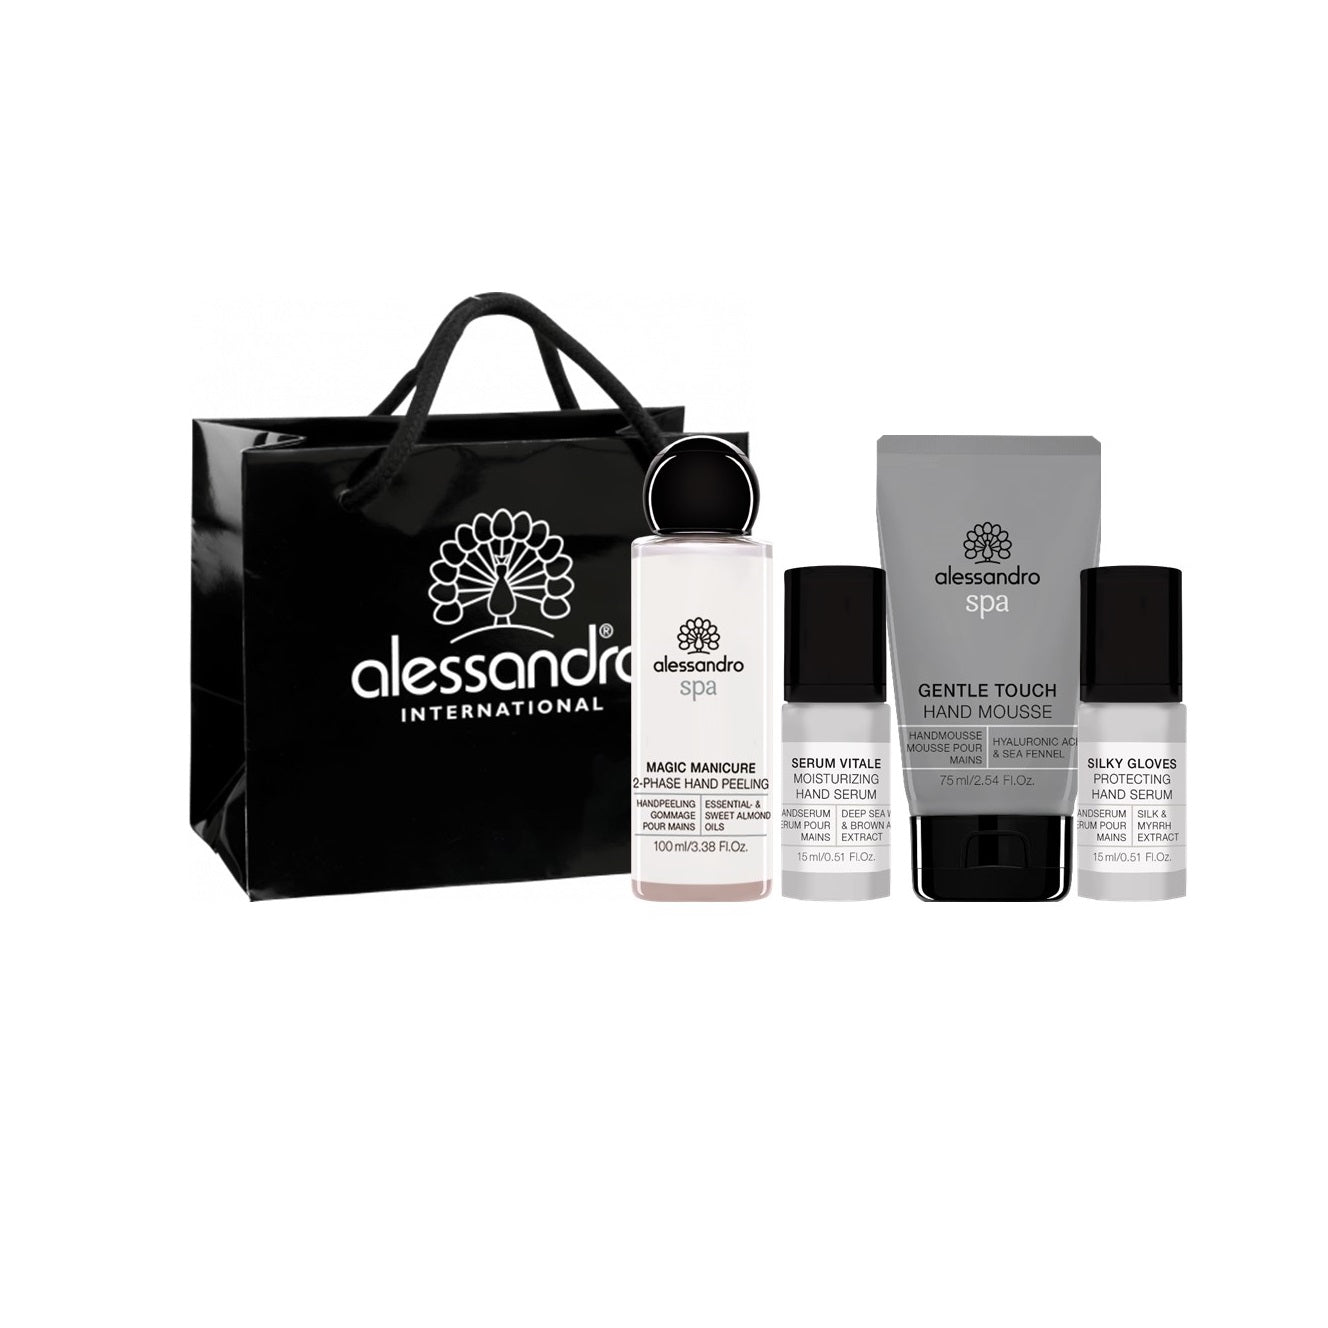 Alessandro Exclusive SPA hand care set No. 6 – Beauty chest